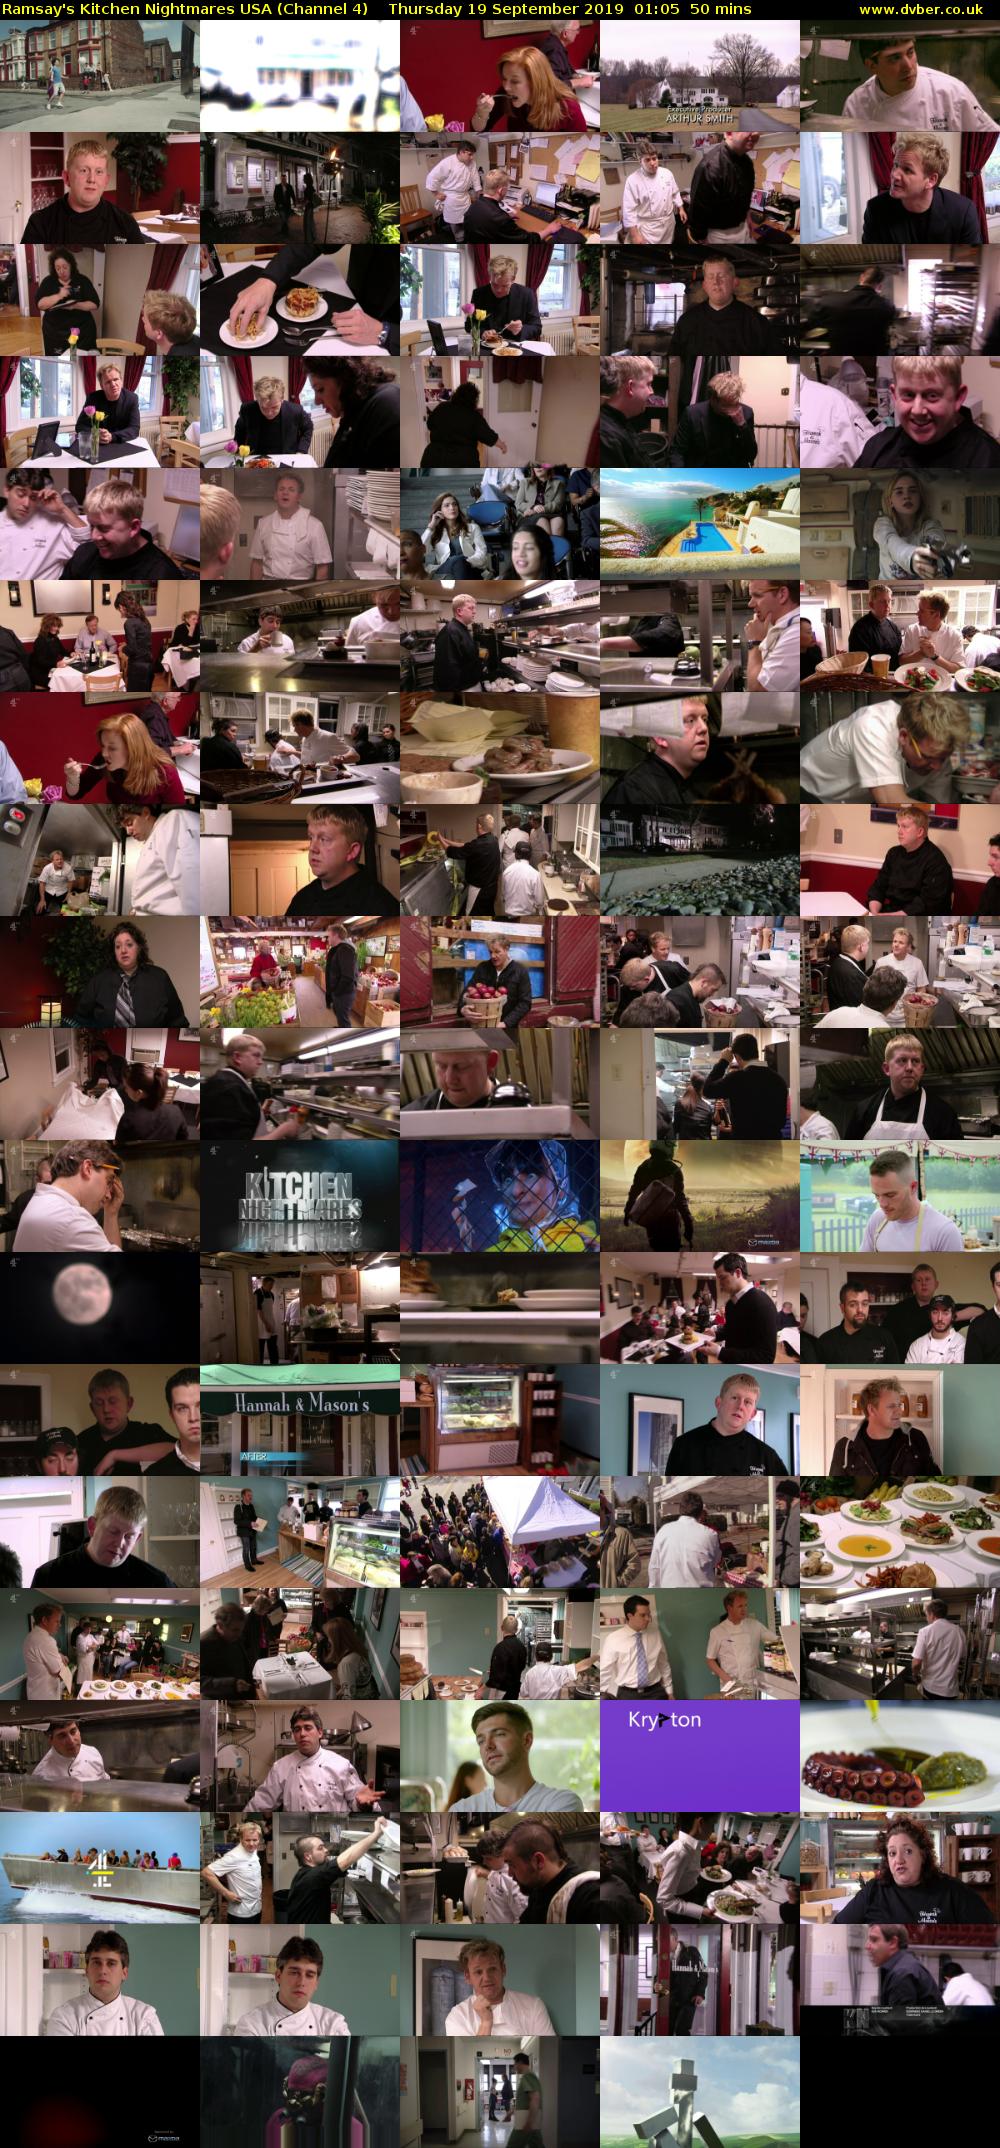 Ramsay's Kitchen Nightmares USA (Channel 4) Thursday 19 September 2019 01:05 - 01:55